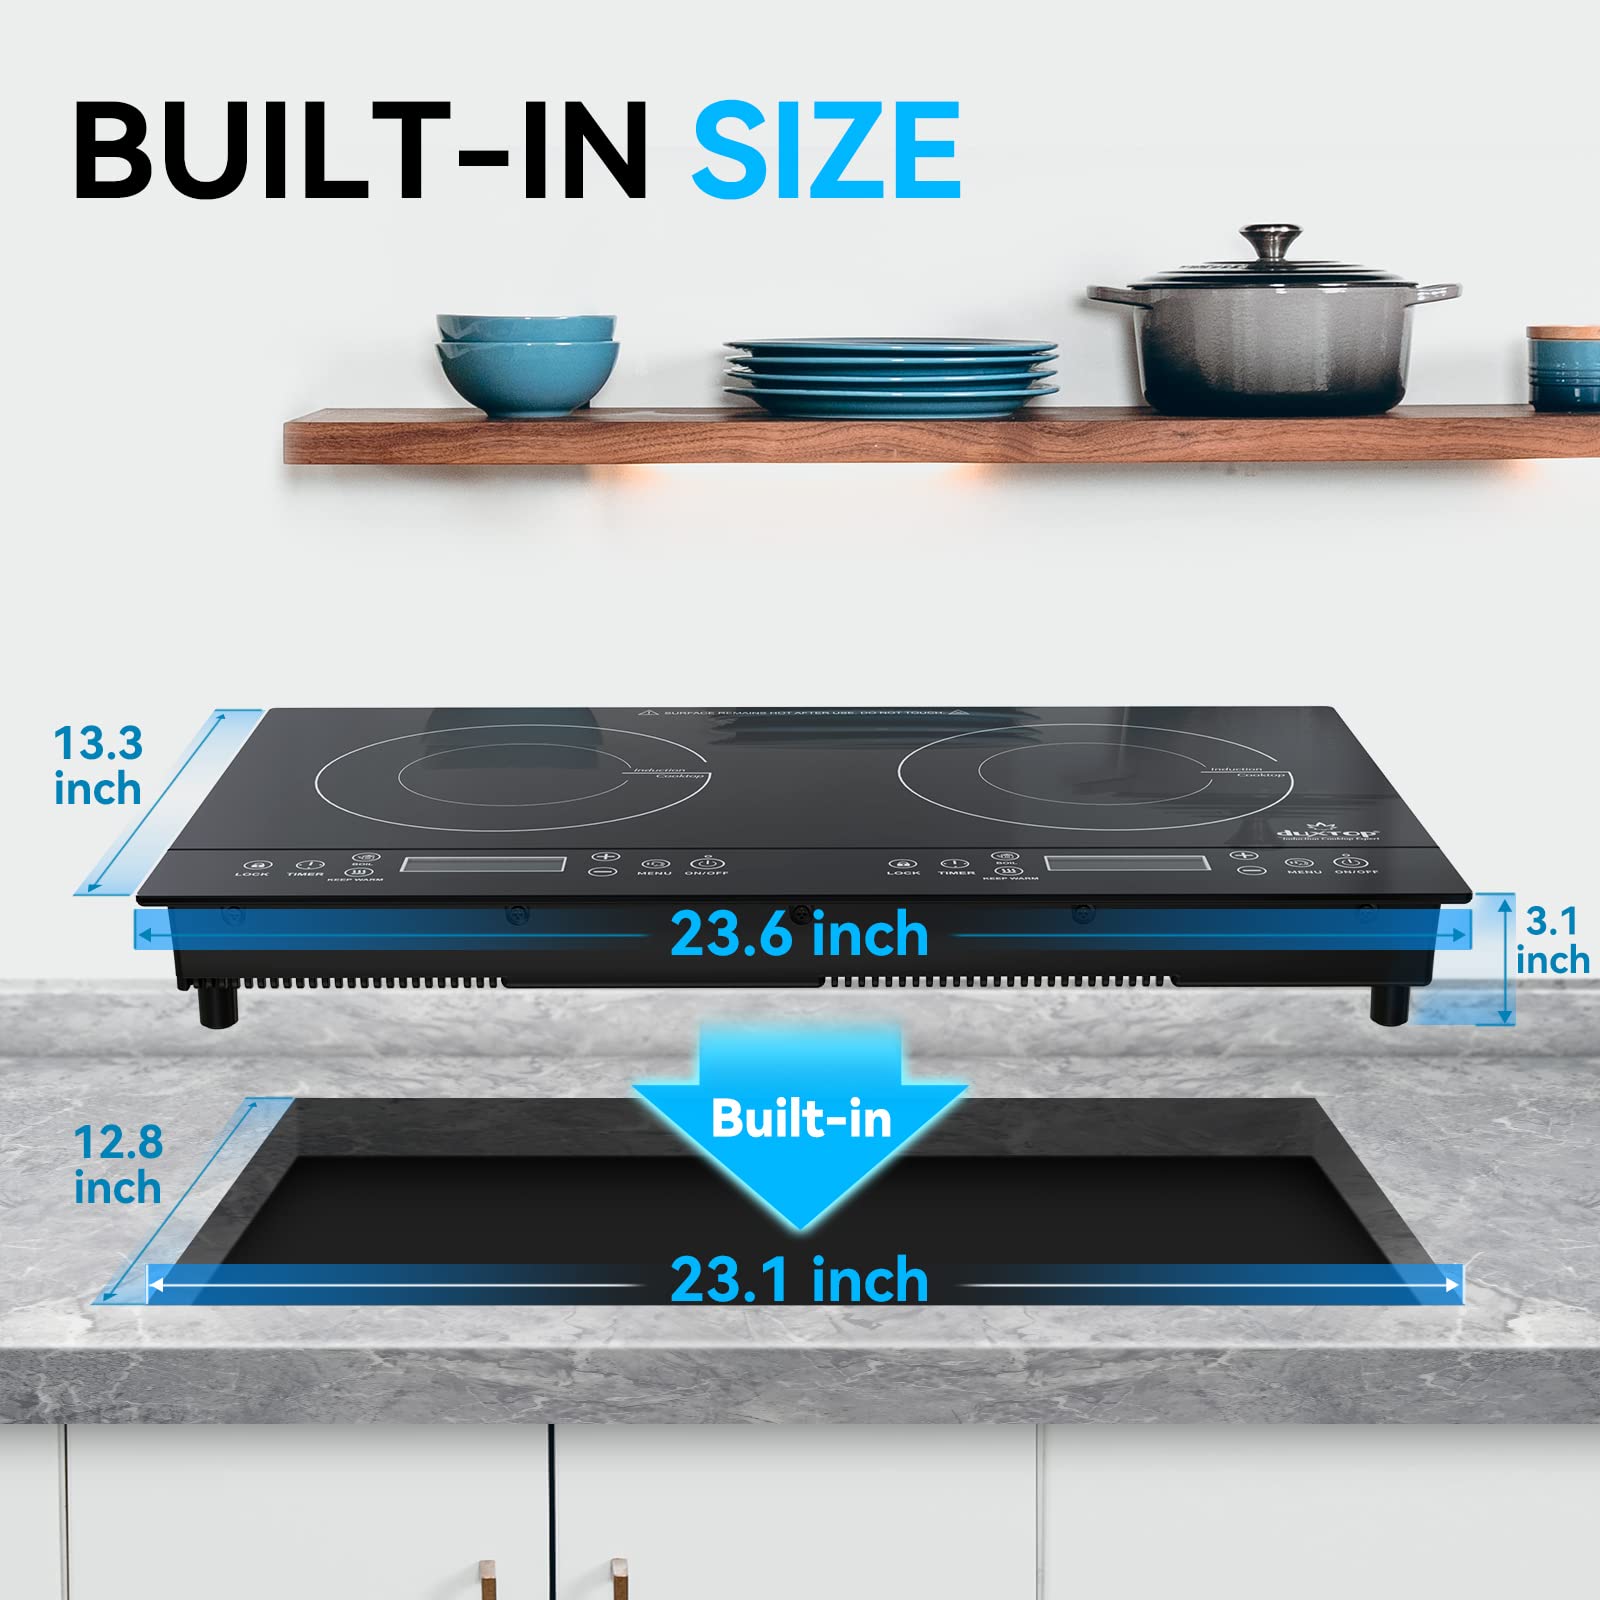 Duxtop LCD 1800W Portable Induction Cooktop 2 Burner, Built-In Countertop Burners with Sensor Touch Control, Electric Cooktop with 2 Burner, Electric Double Induction Burner for Cooking, 9720LCBI